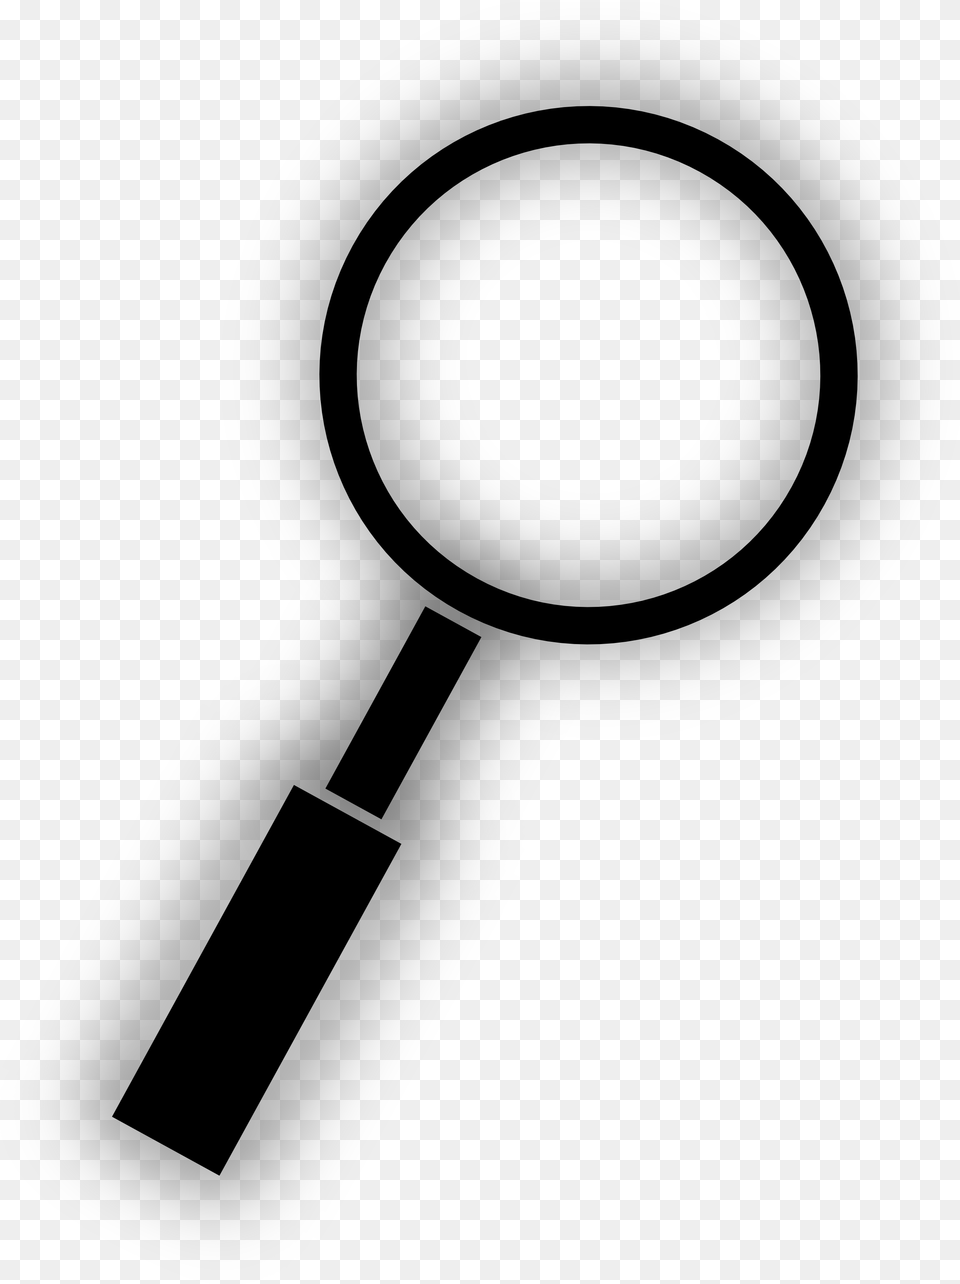 House Clipart Magnifying Glass Vector Royalty Magnifying Glass, Key, Nature, Astronomy, Moon Png Image